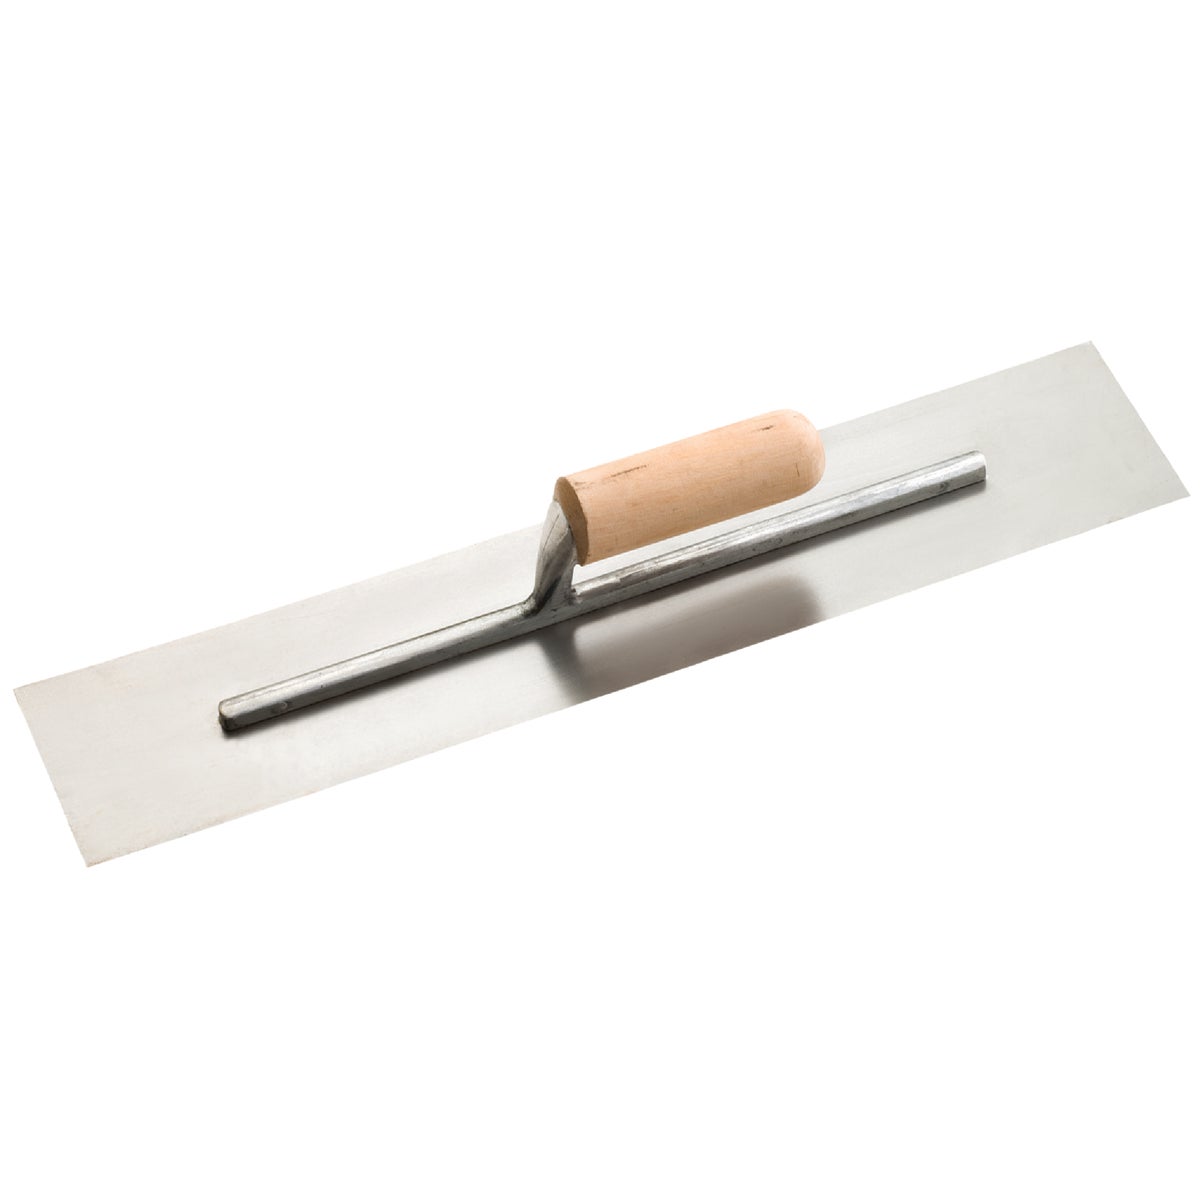 Do it 4 In. x 20 In. Finishing Trowel with Basswood Handle